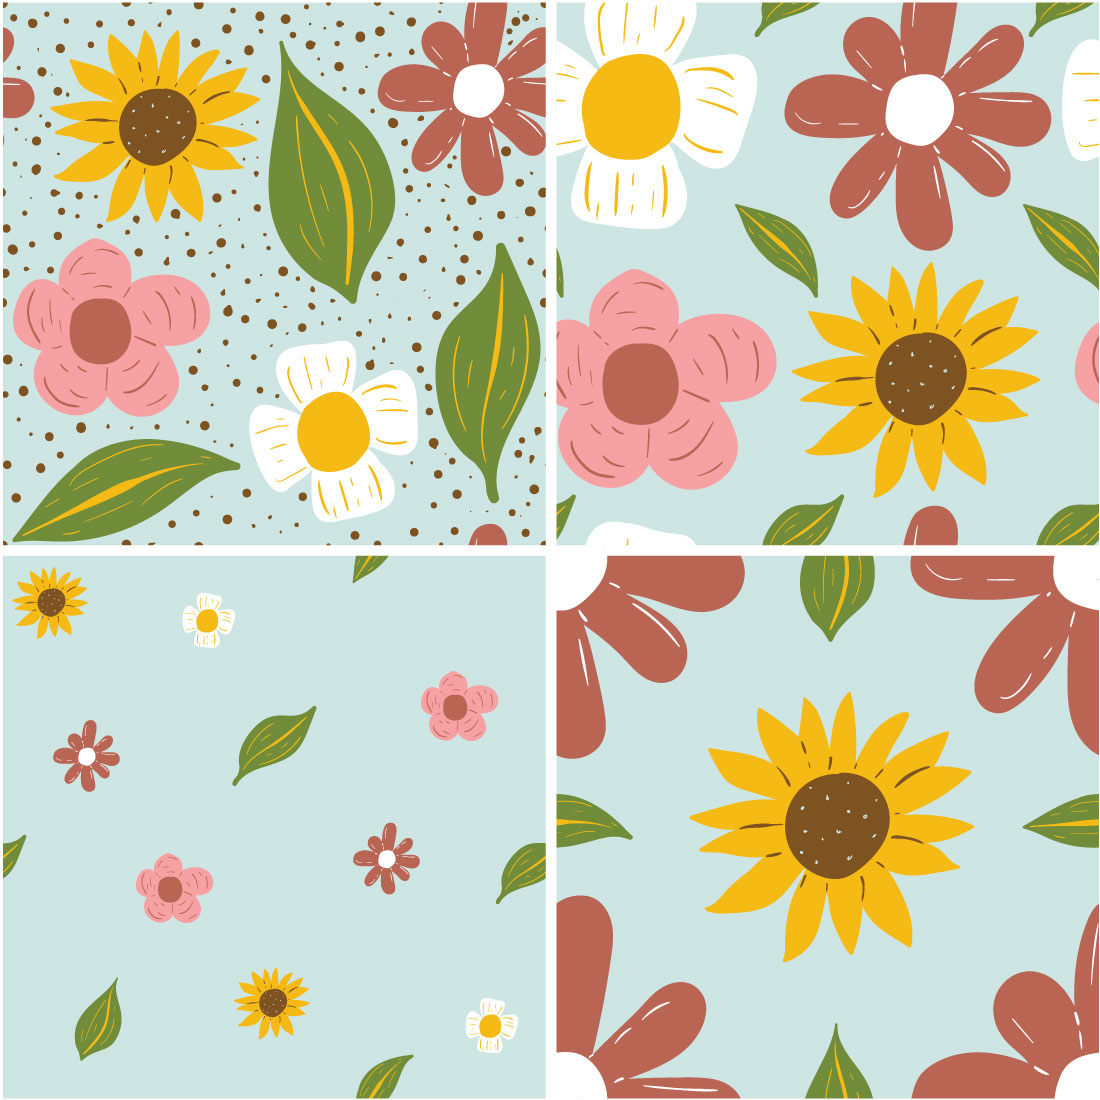 Flower Seamless Pattern cover image.